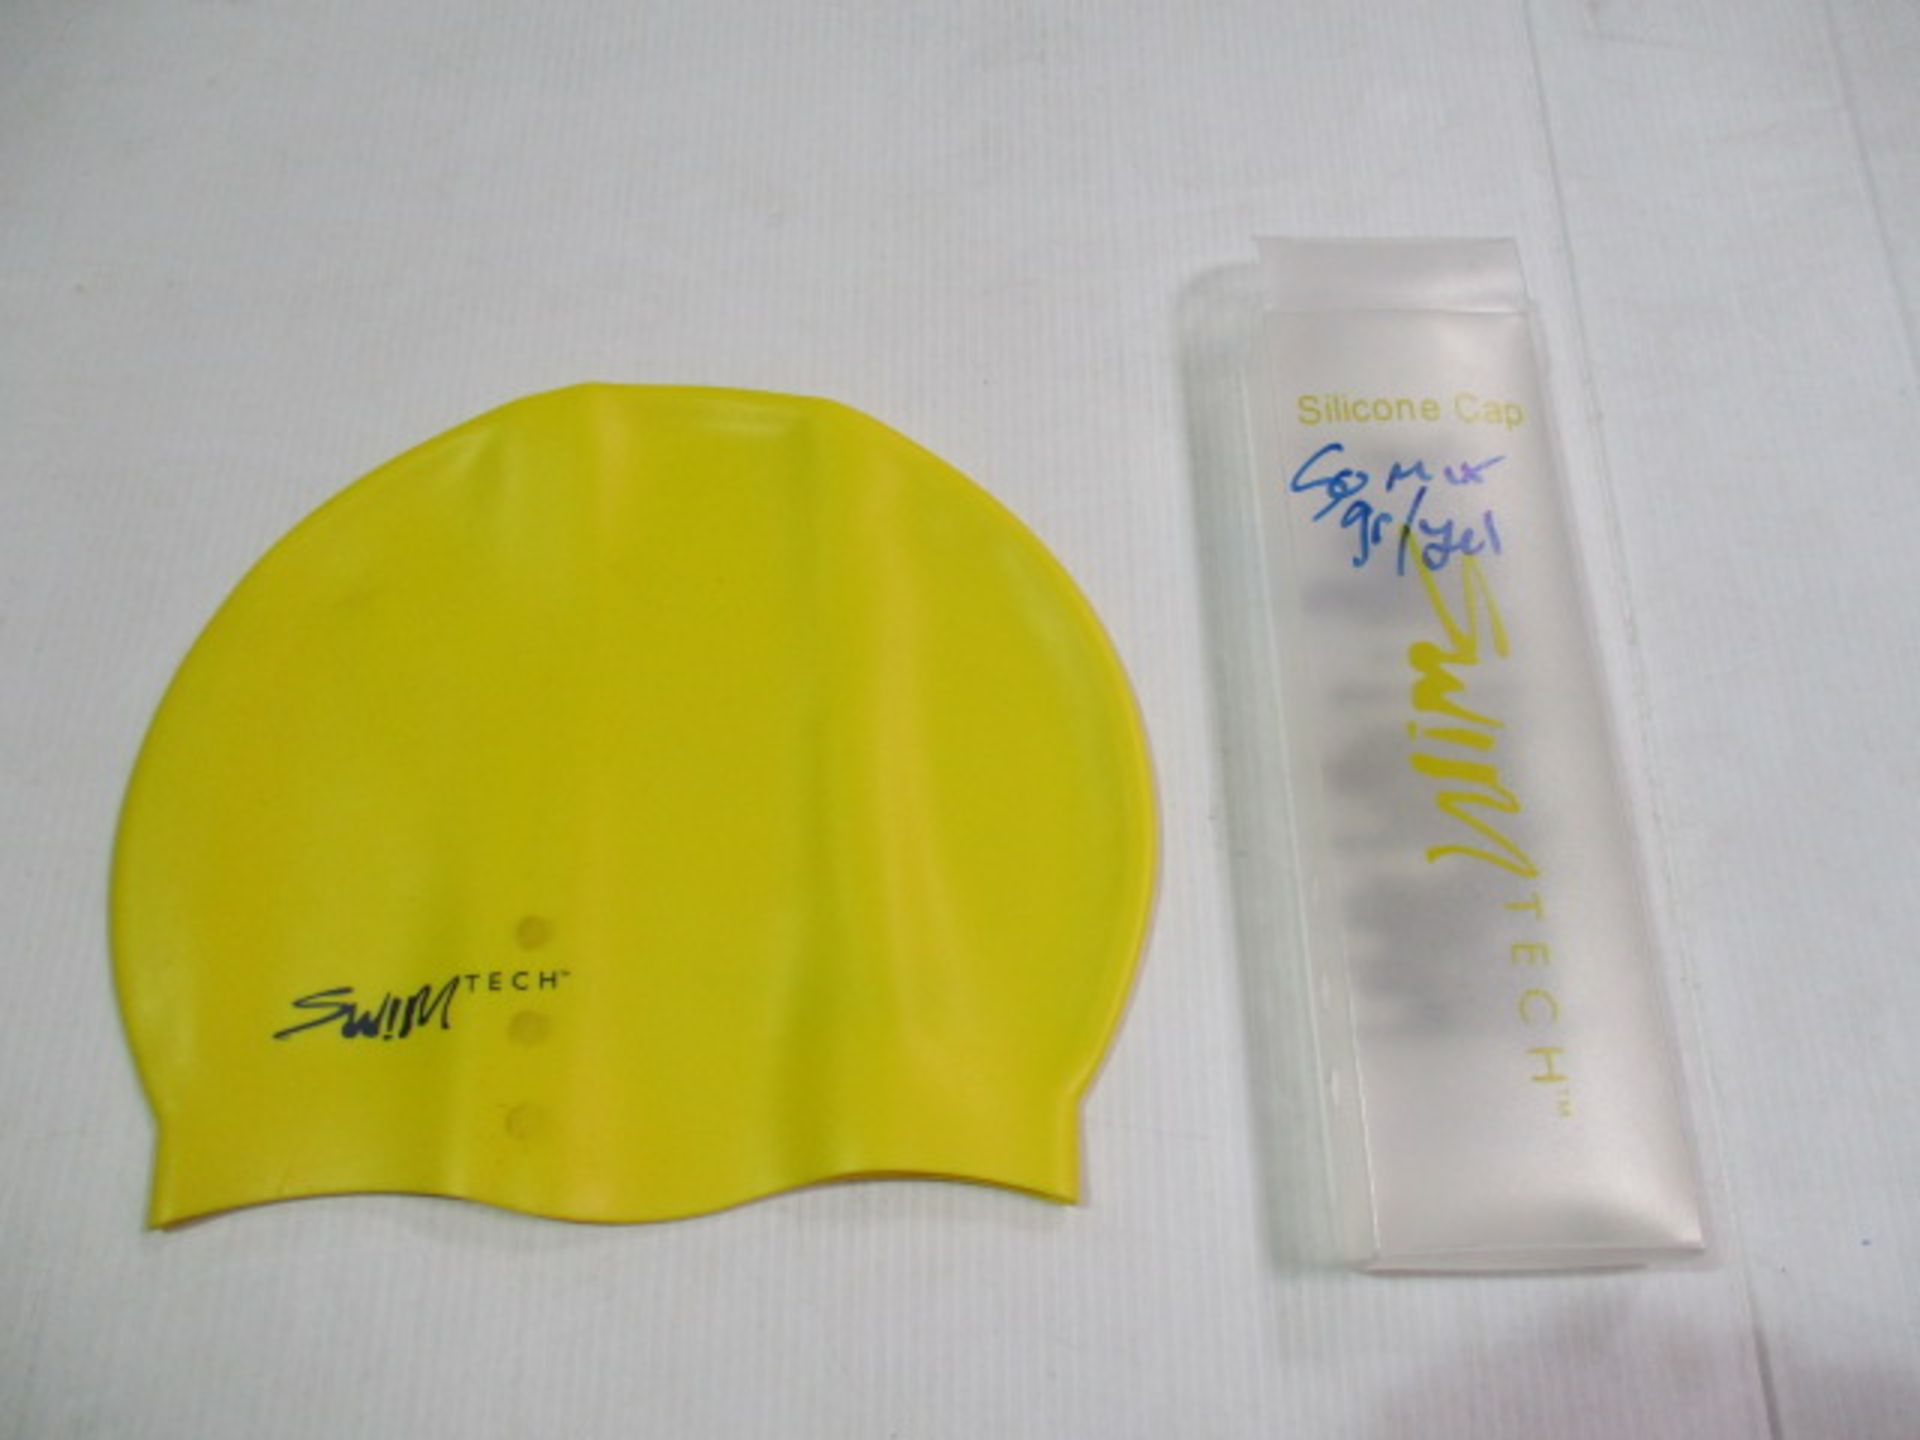 50pcs Brand new Swimming hat - will be a mix of yellow and green colours brand new in carry box